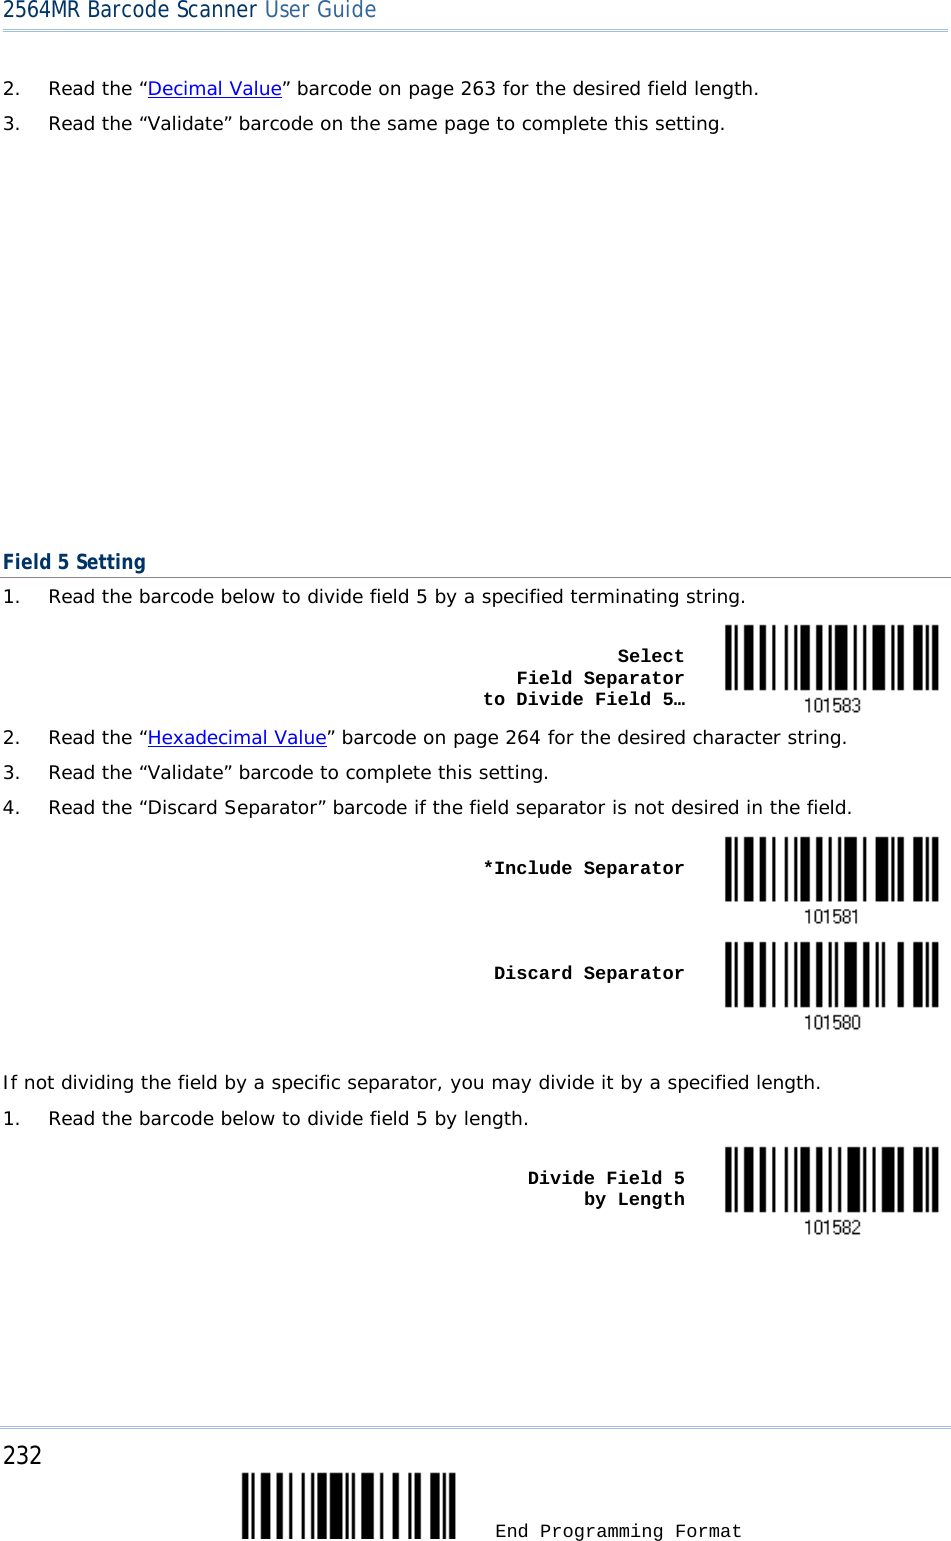 2564MR Barcode Scanner User Guide  2. Read the “Decimal Value” barcode on page 263 for the desired field length. 3. Read the “Validate” barcode on the same page to complete this setting.                    Field 5 Setting 1. Read the barcode below to divide field 5 by a specified terminating string.    Select          Field Separator    to Divide Field 5…  2. Read the “Hexadecimal Value” barcode on page 264 for the desired character string. 3. Read the “Validate” barcode to complete this setting. 4. Read the “Discard Separator” barcode if the field separator is not desired in the field.    *Include Separator     Discard Separator   If not dividing the field by a specific separator, you may divide it by a specified length. 1. Read the barcode below to divide field 5 by length.    Divide Field 5      by Length  232  End Programming Format 